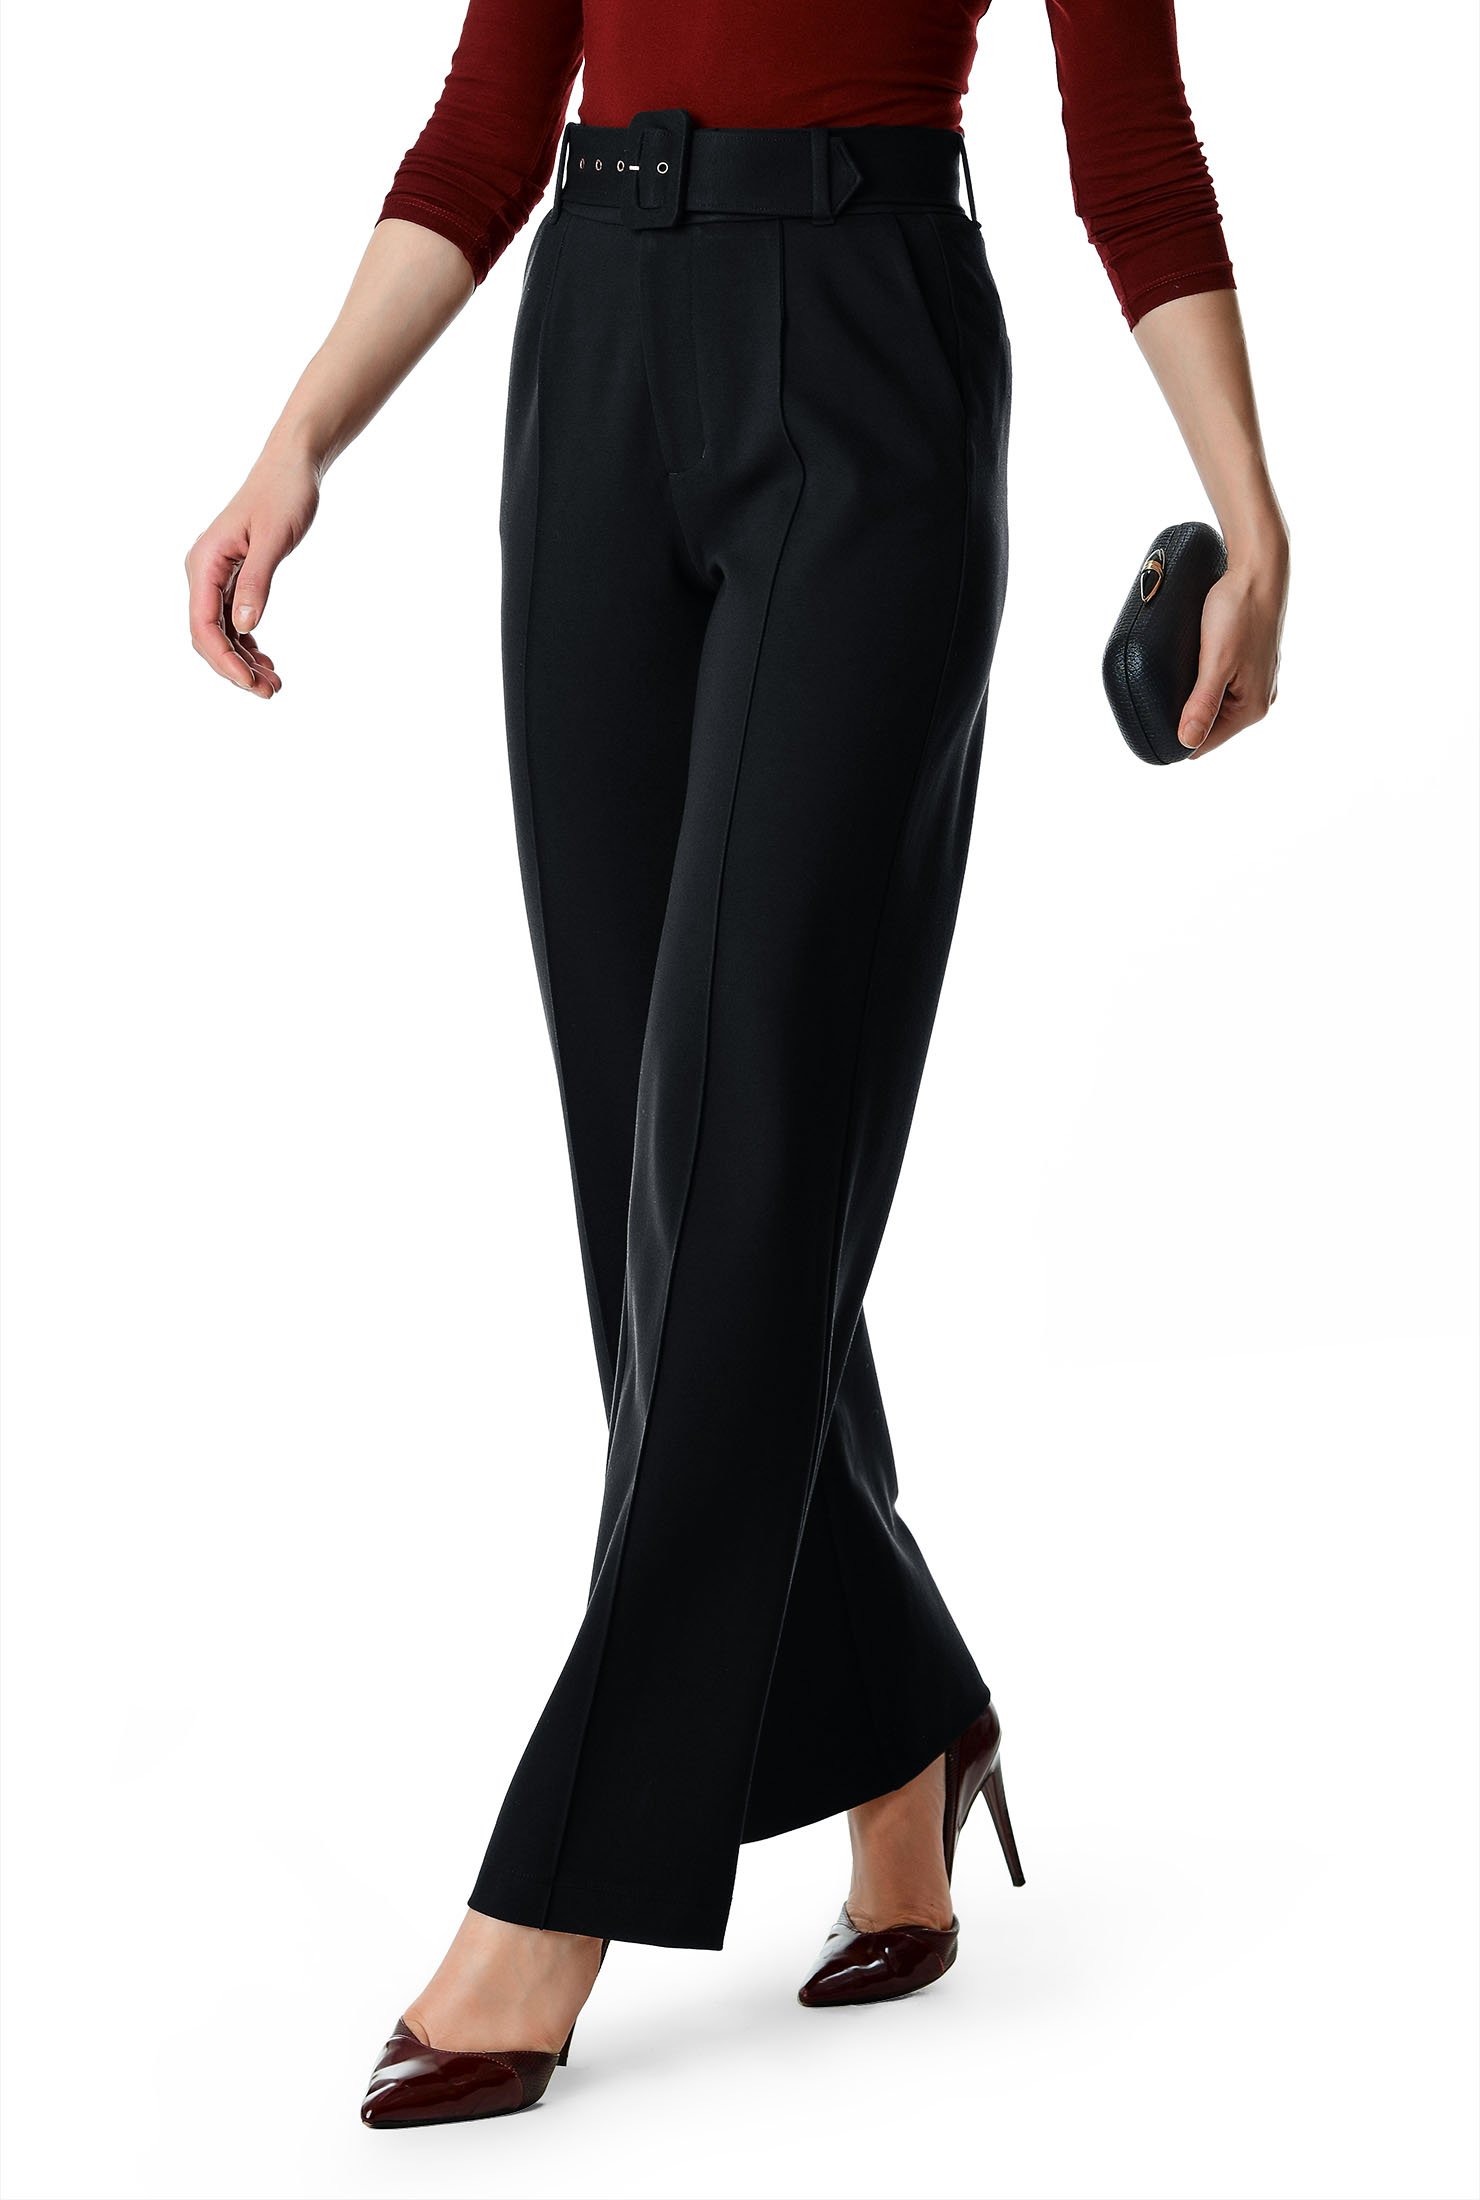 Wide Leg Pants for Women Summer Solid Color High Waist Stretch 7/8